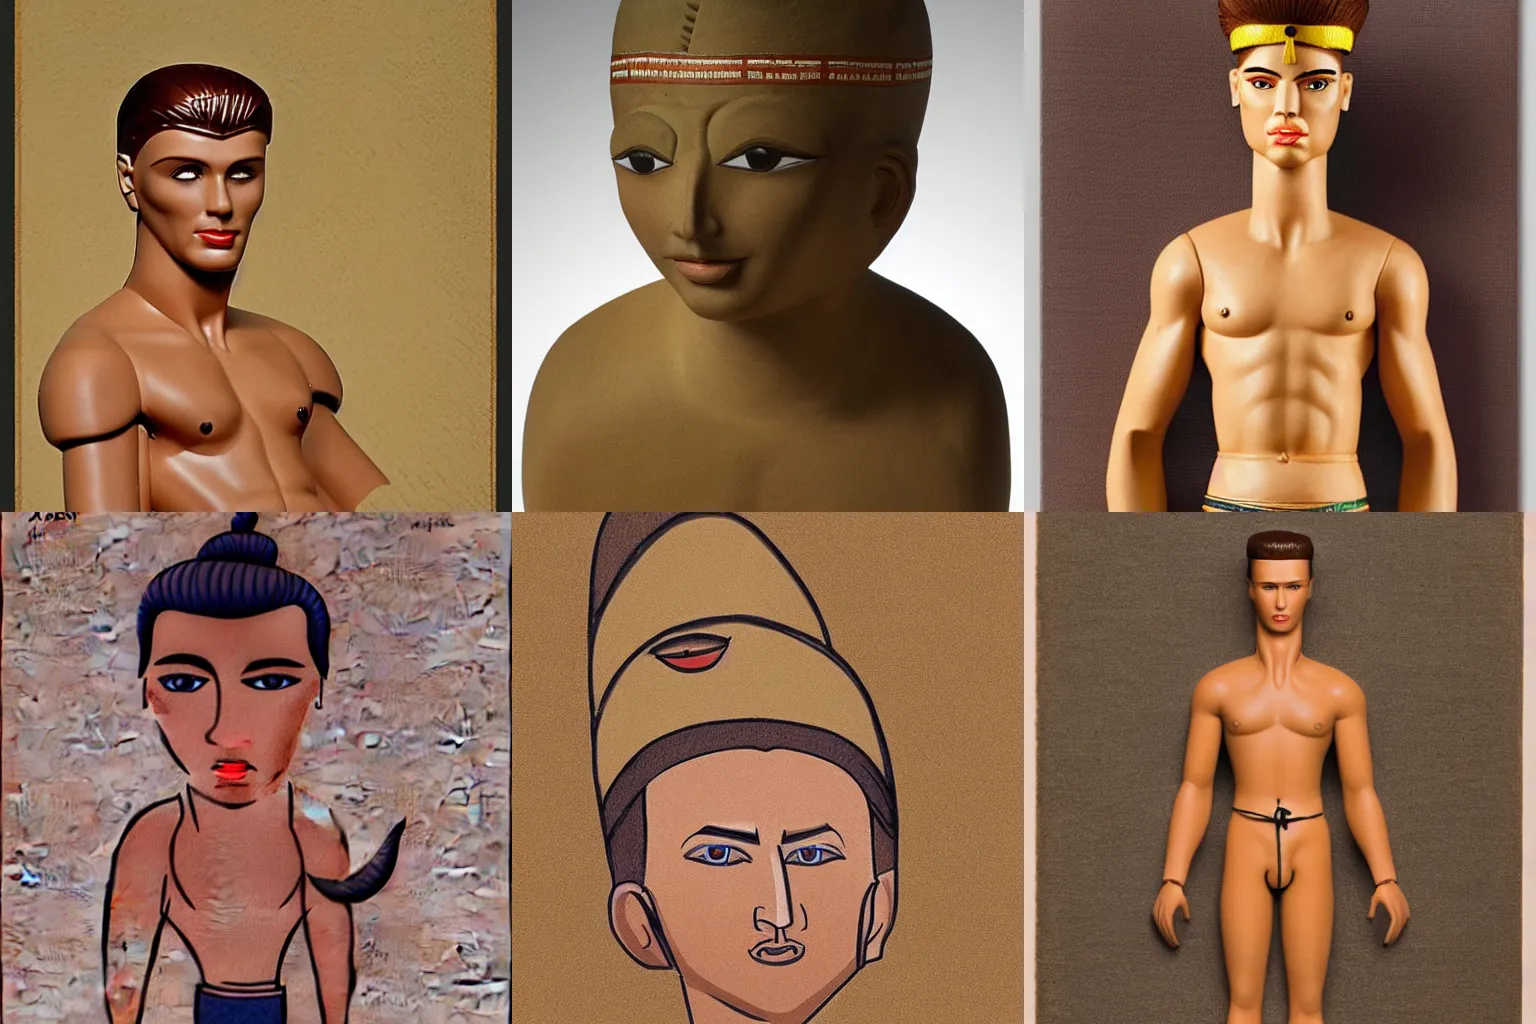 Prompt: ken doll, illustration, art in the style of Mesopotamia 3000 to 4000 BCE